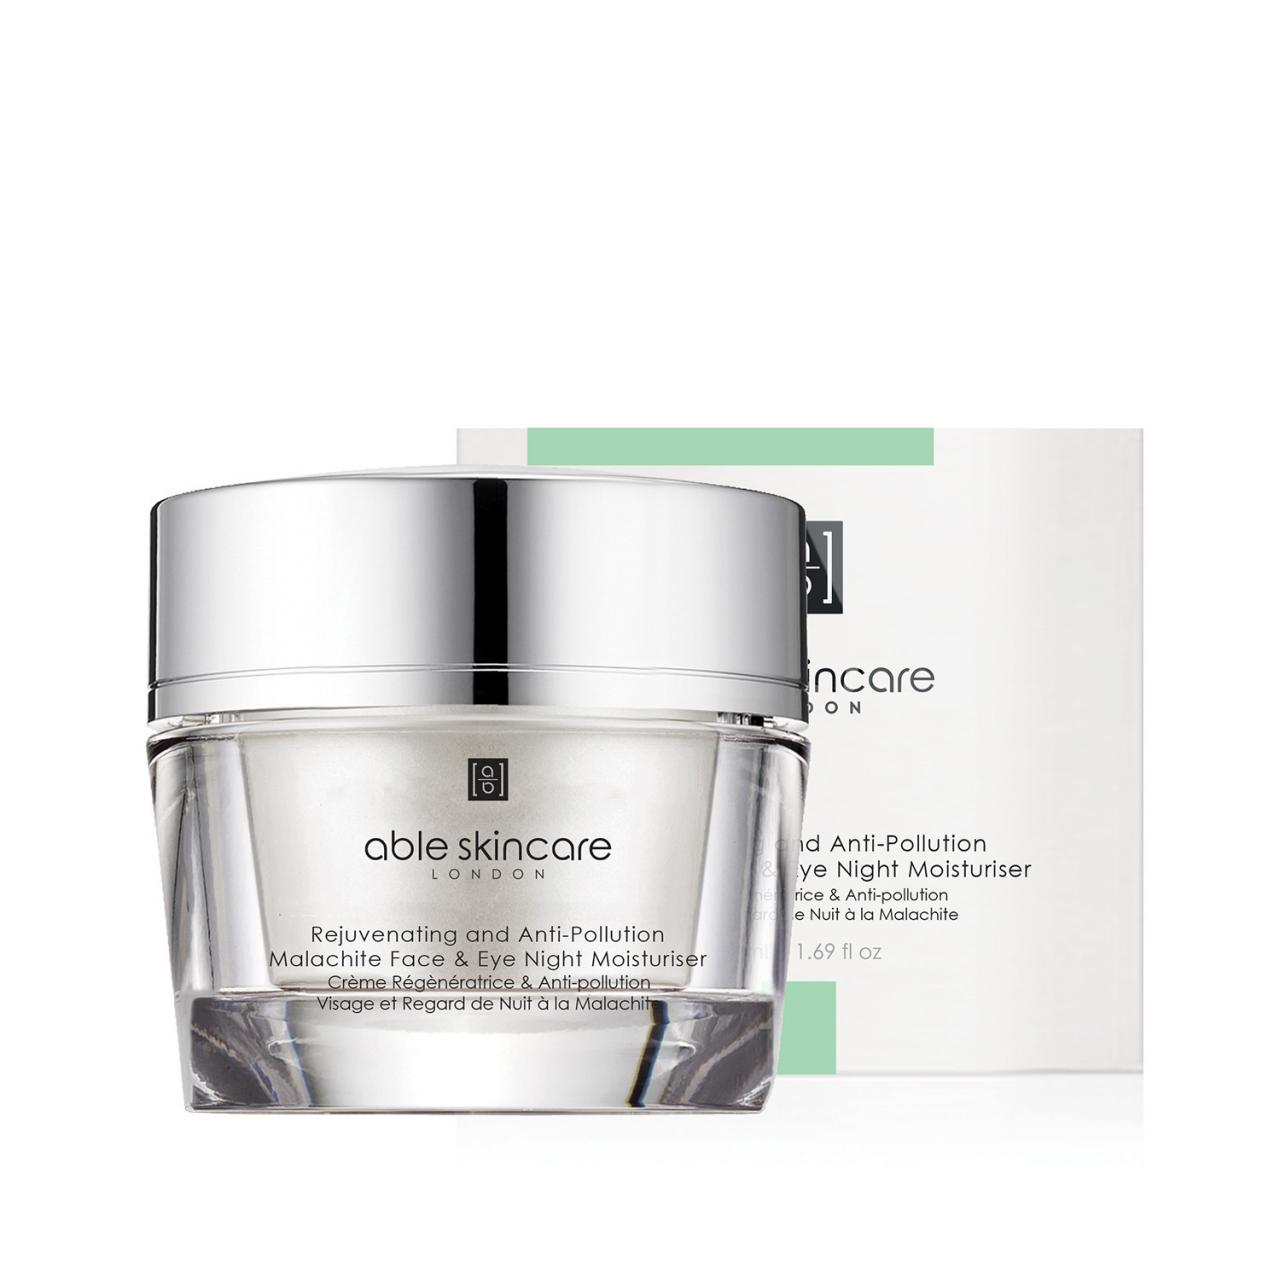 Able Skincare Anti-Aging Duo Moisturizer, Rejuvenate Your Skin with Youthful Radiance